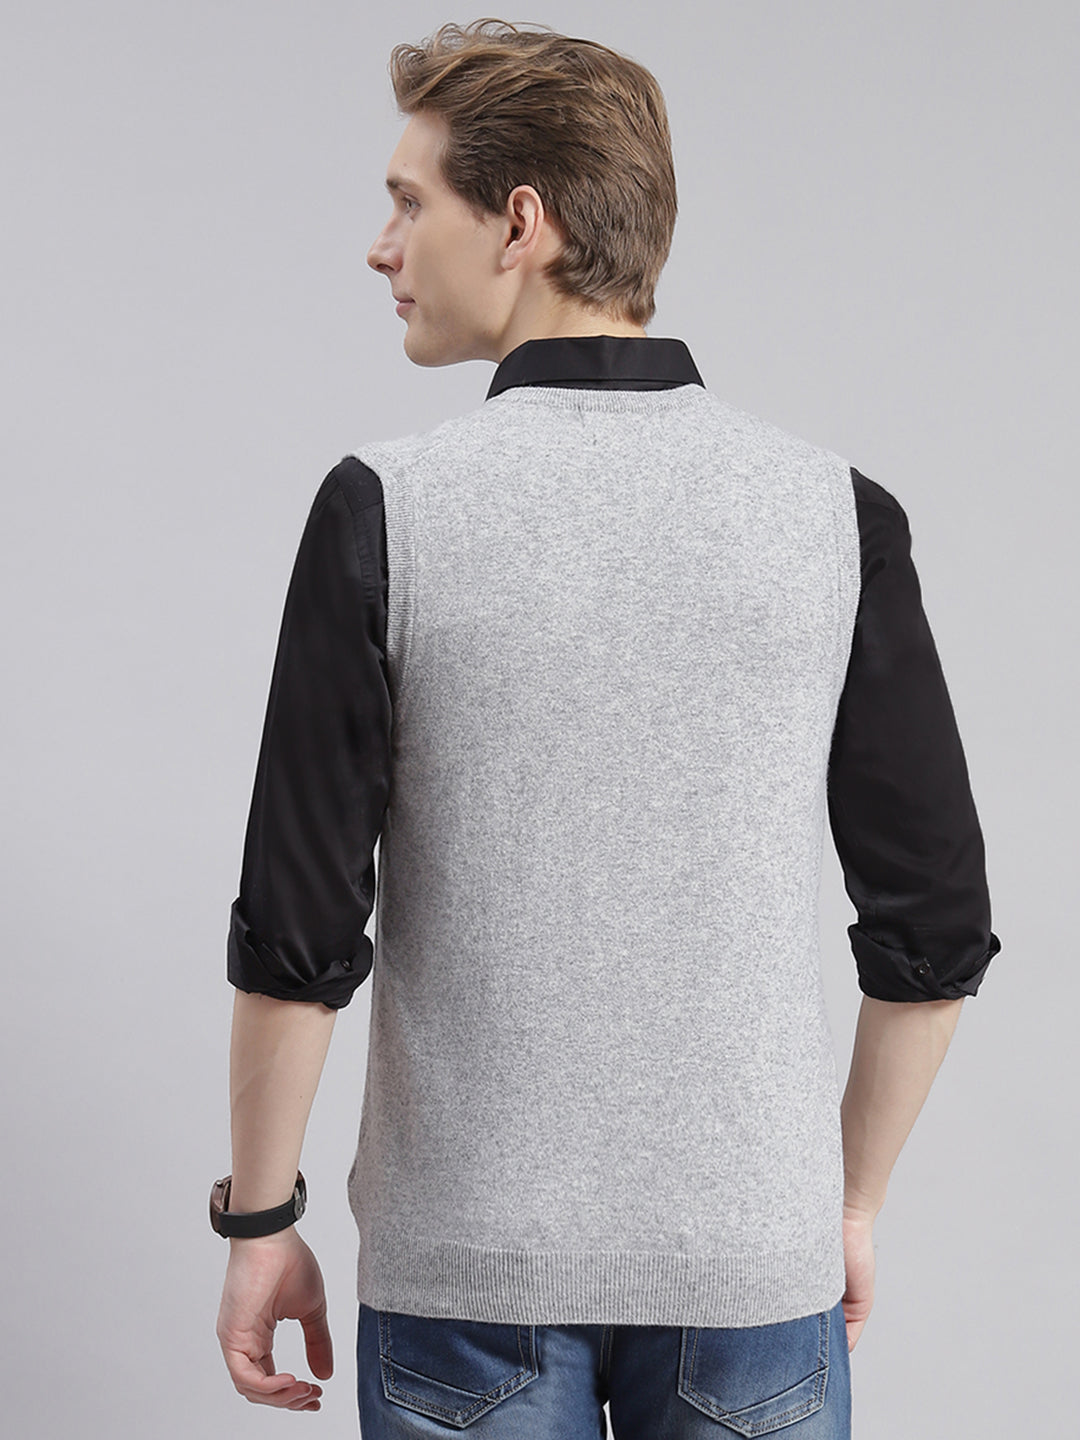 Buy Men Grey Solid V Neck Sleeveless Sweaters/Pullovers Online in India -  Monte Carlo